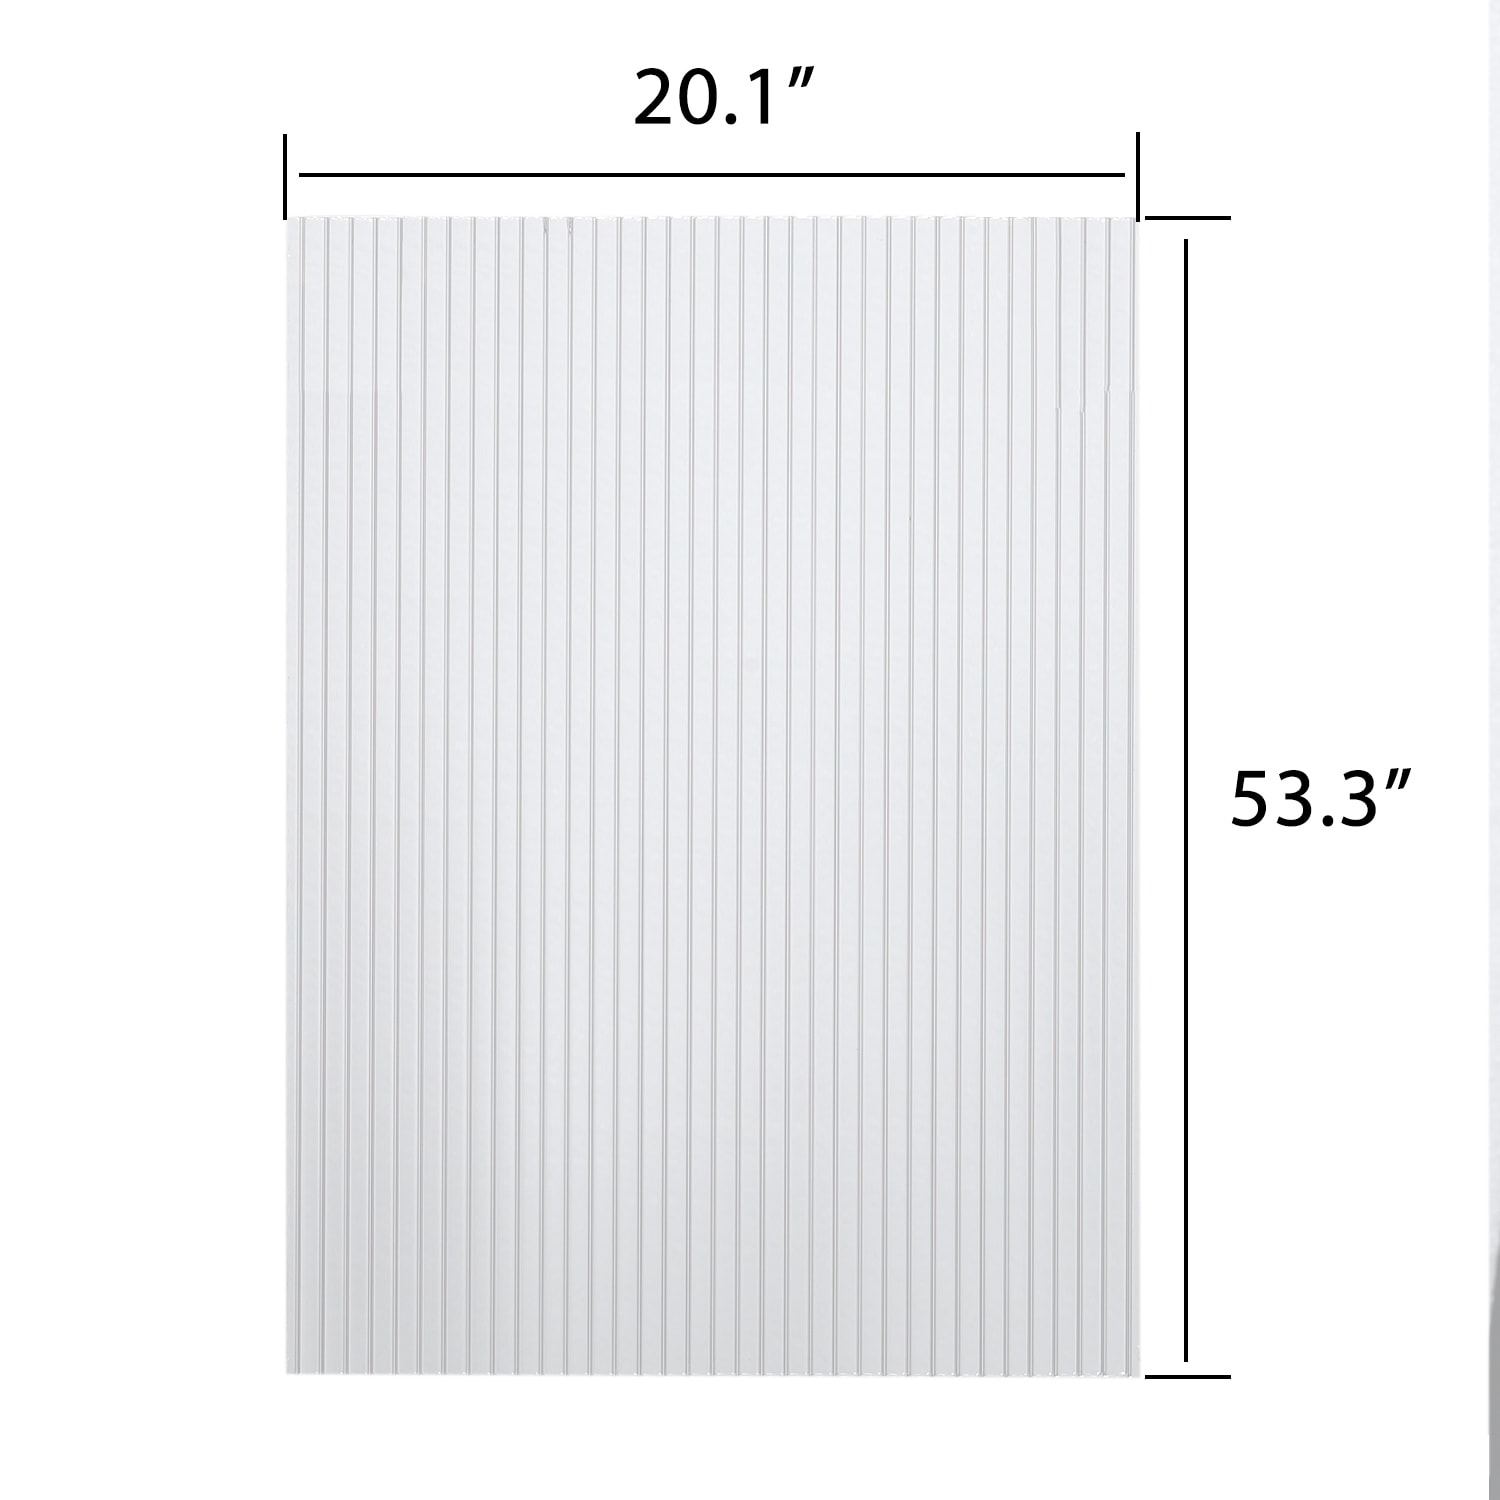 Aoodor Polycarbonate Greenhouse Panels Polycarbonate Sheet 6 Pieces - 5.3x2